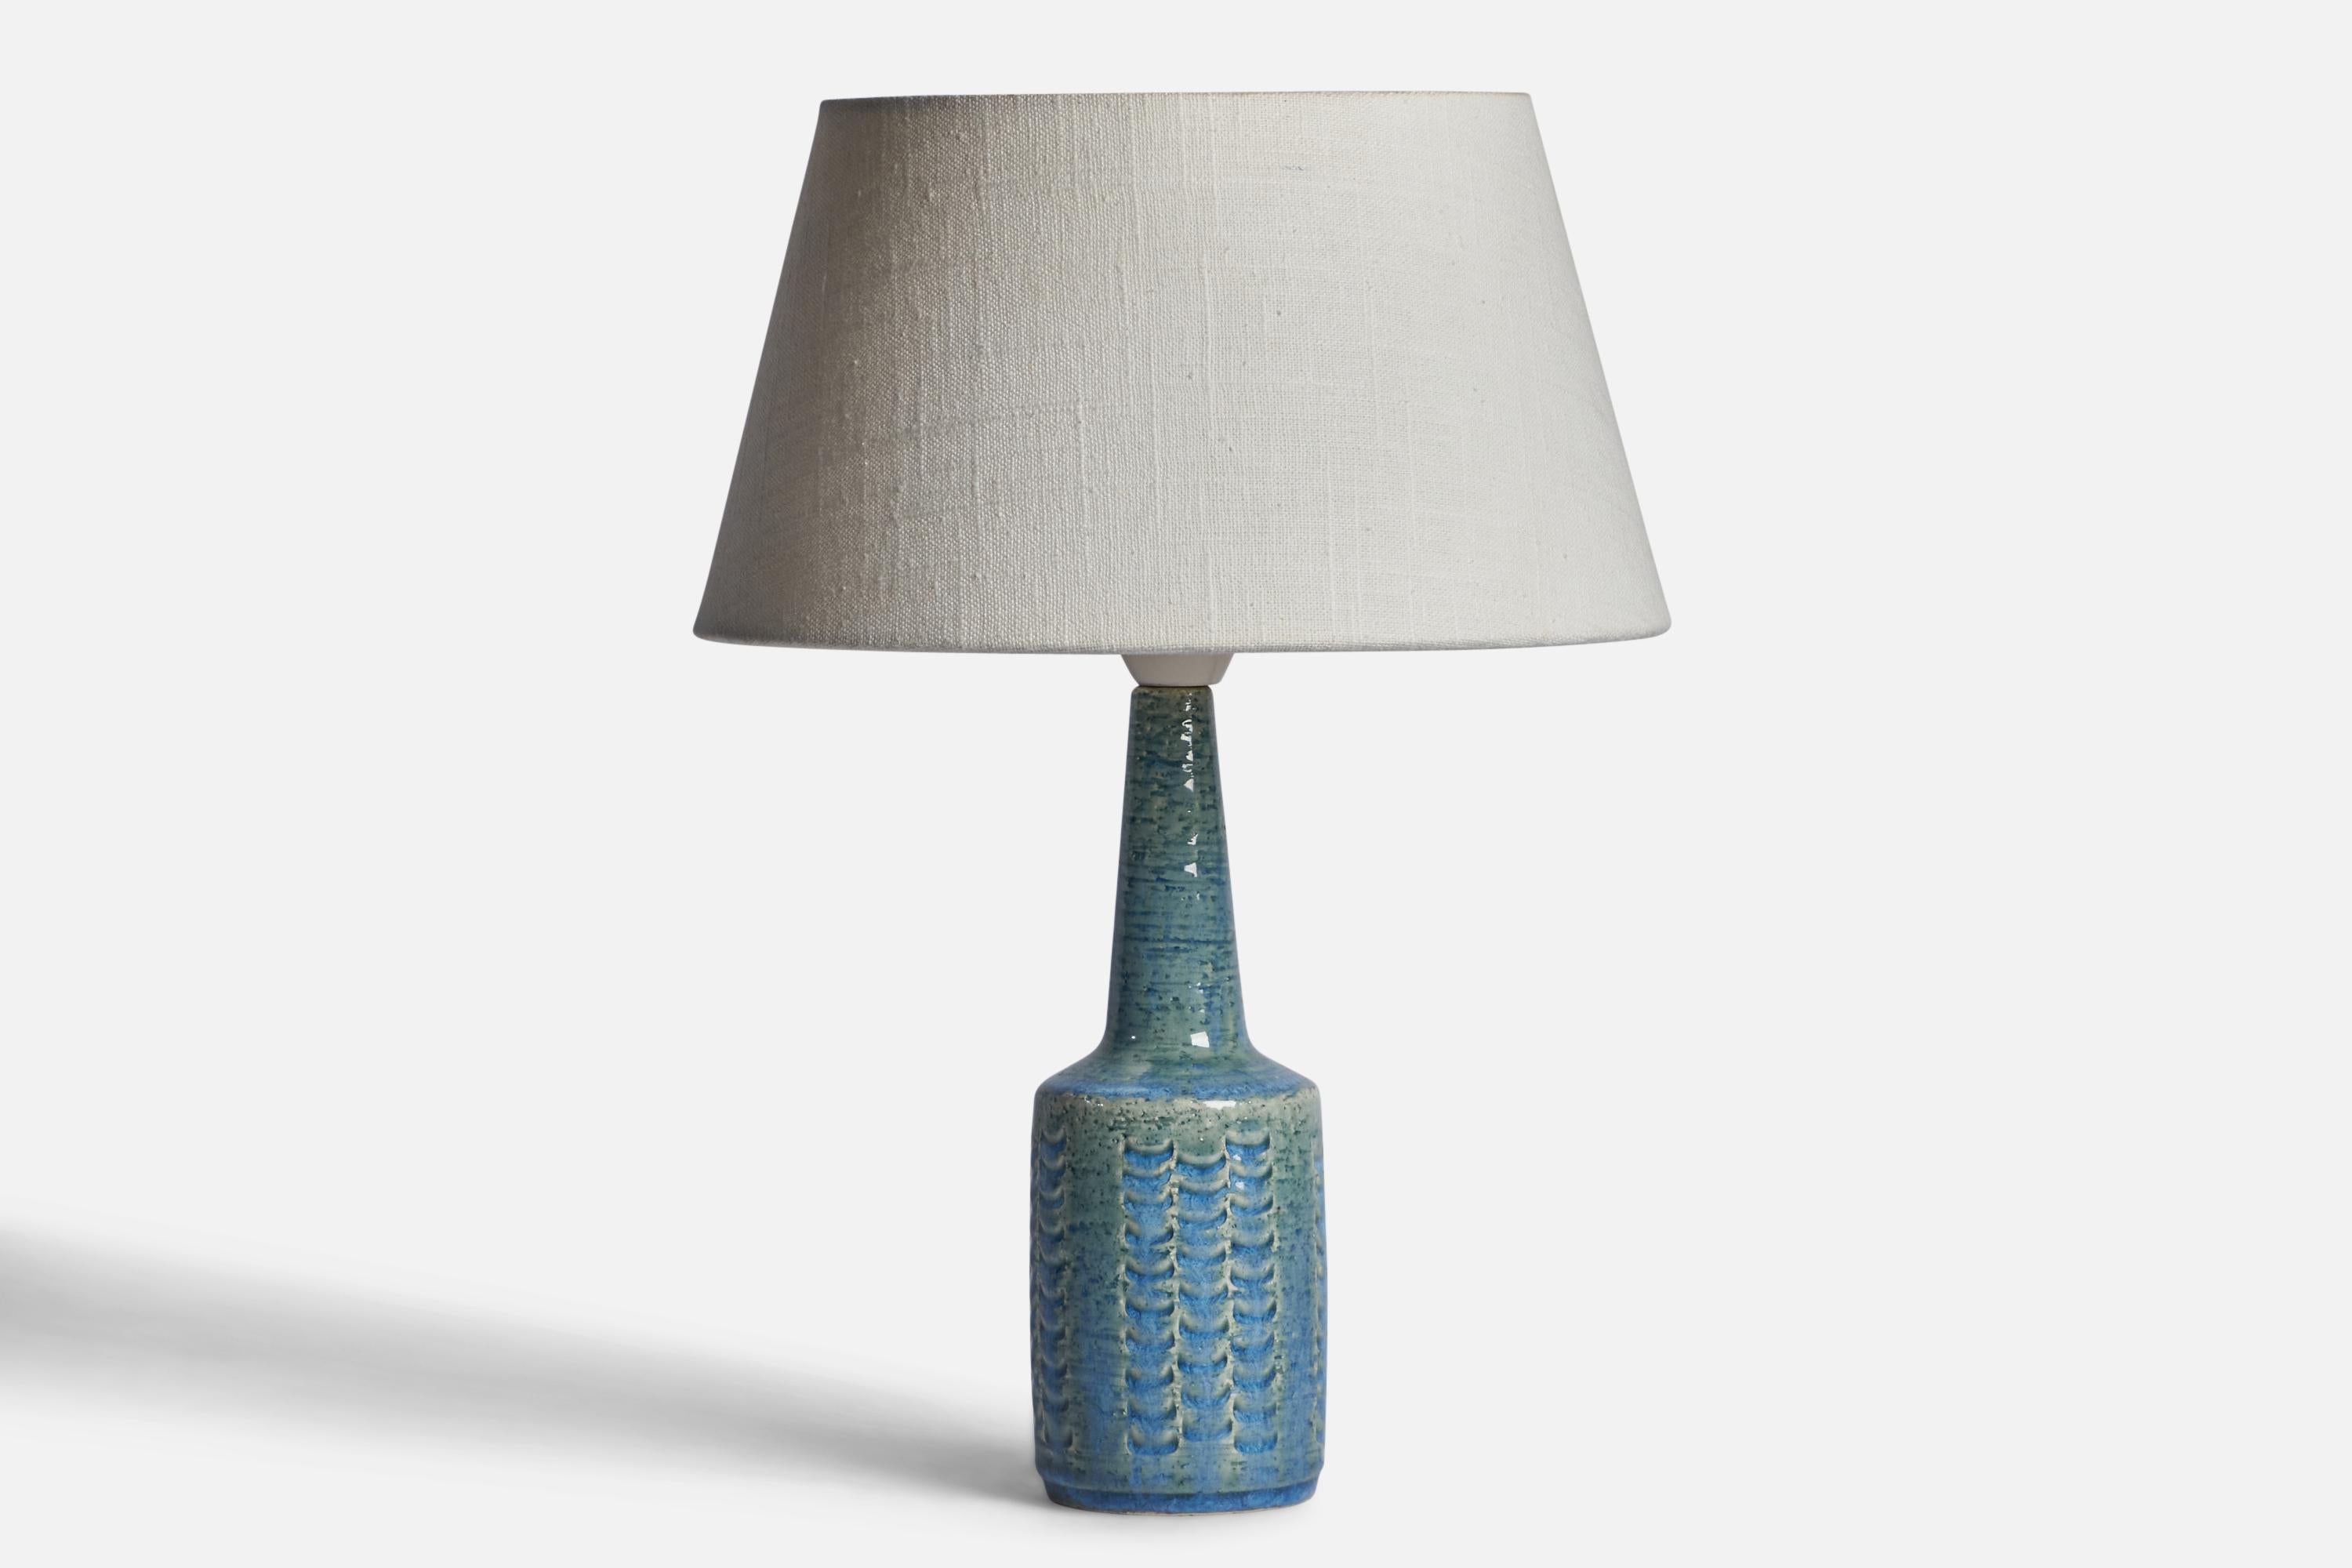 A blue-glazed stoneware table lamp designed by Per & Annelise Linneman-Schmidt and produced by Palshus, Denmark, 1960s.

Dimensions of Lamp (inches): 11.35” H x 3” Diameter
Dimensions of Shade (inches): 7” Top Diameter x 10” Bottom Diameter x